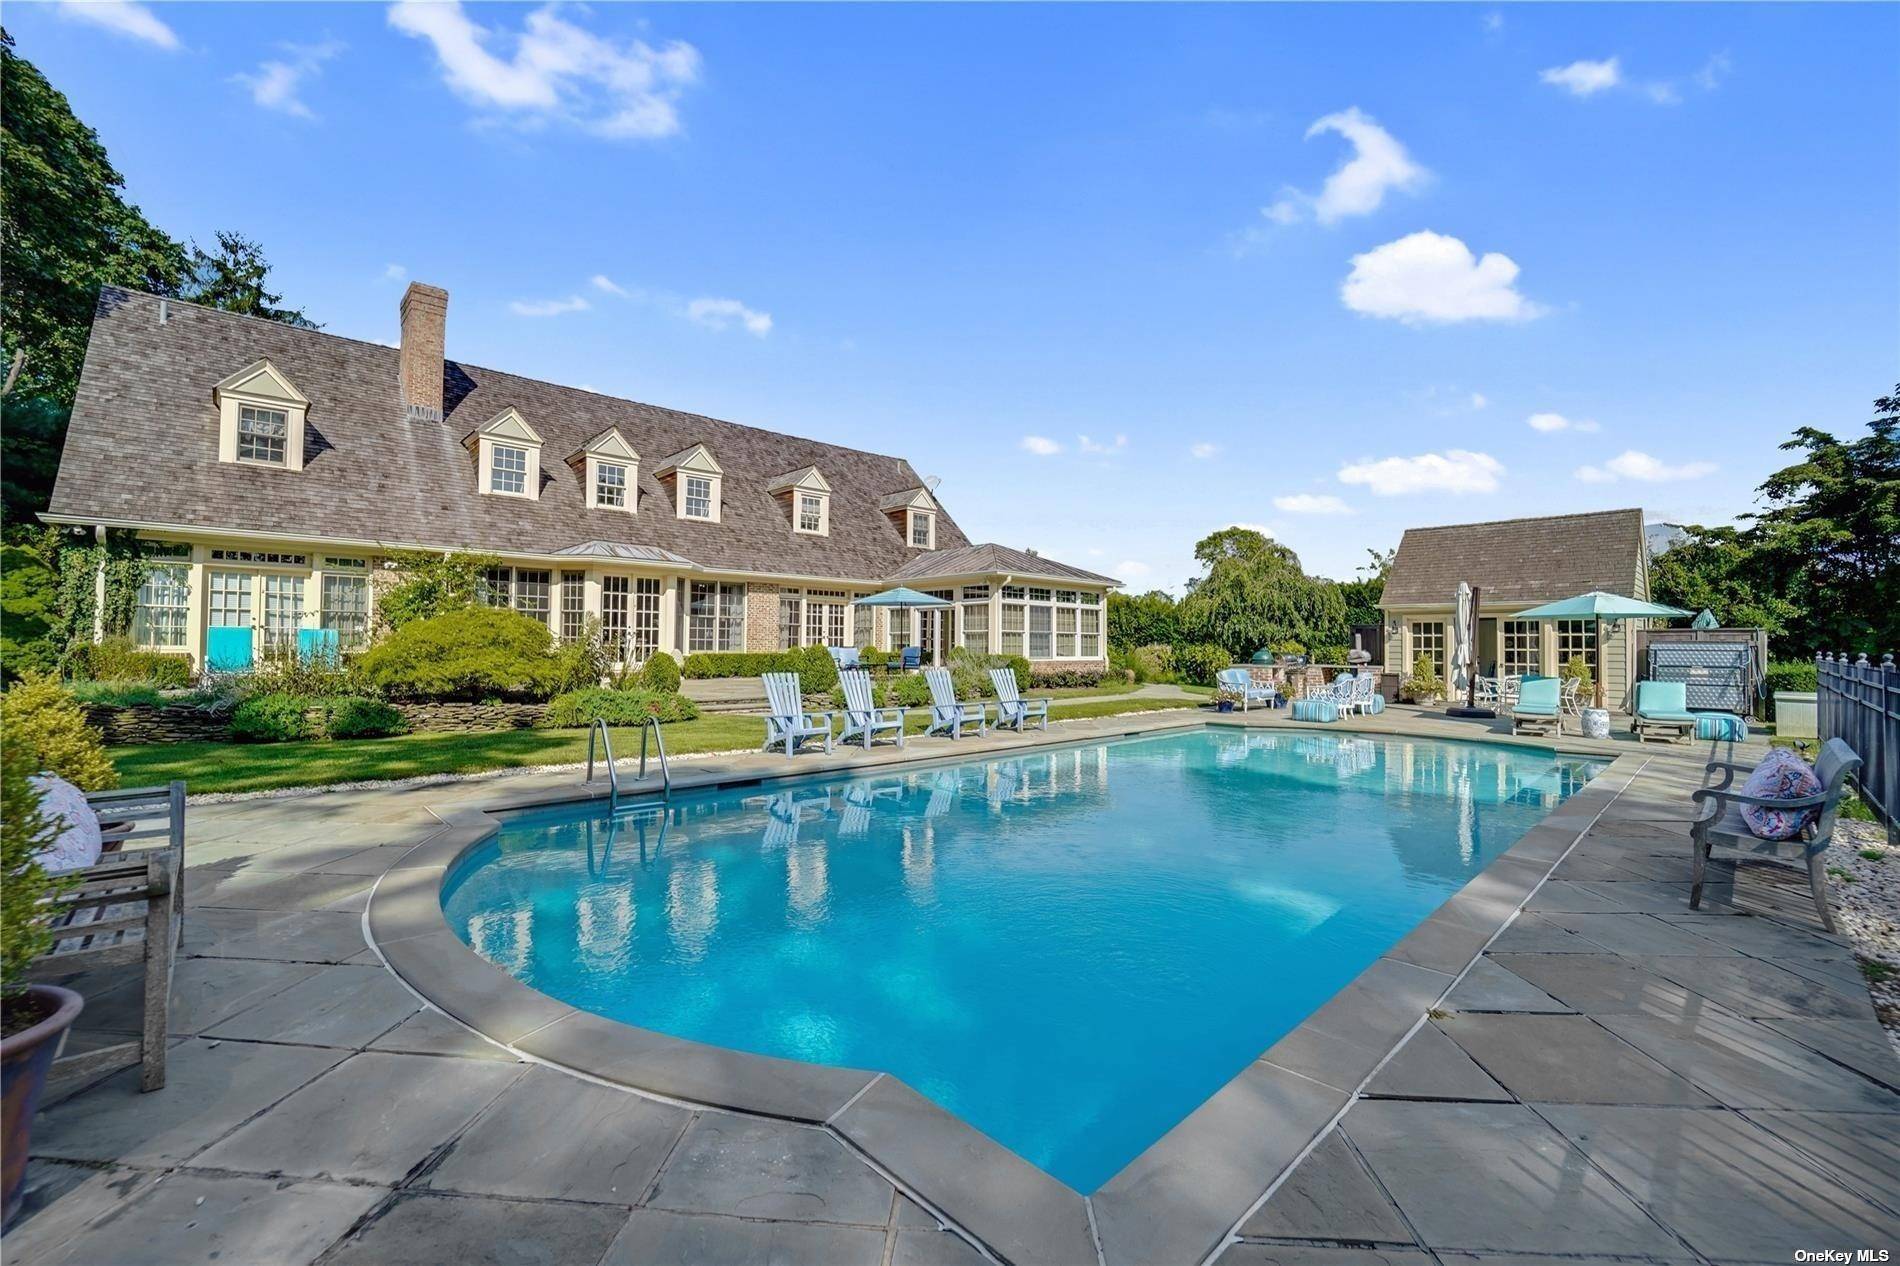 An architectural gem situated in the heart of Westhampton Beach Village.